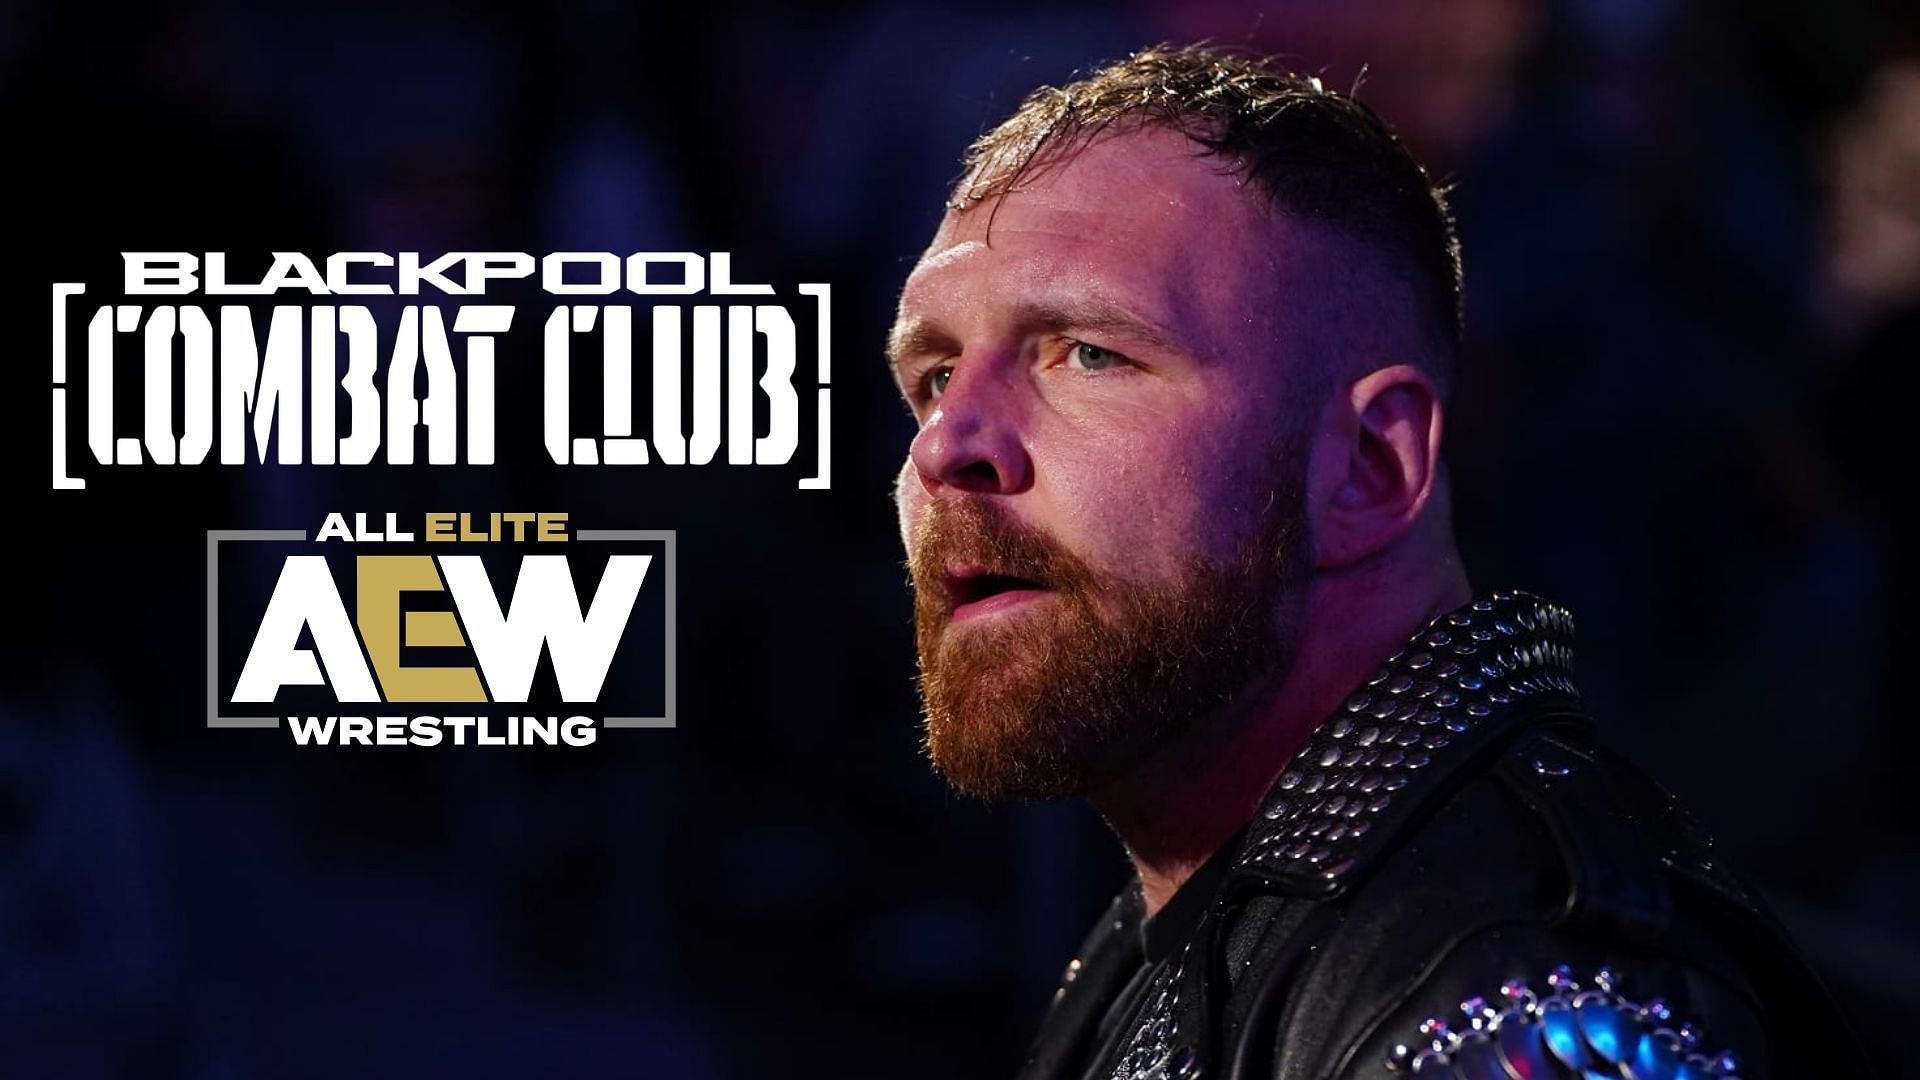 Jon Moxley and the Blackpool Combat Club have seen as bullies